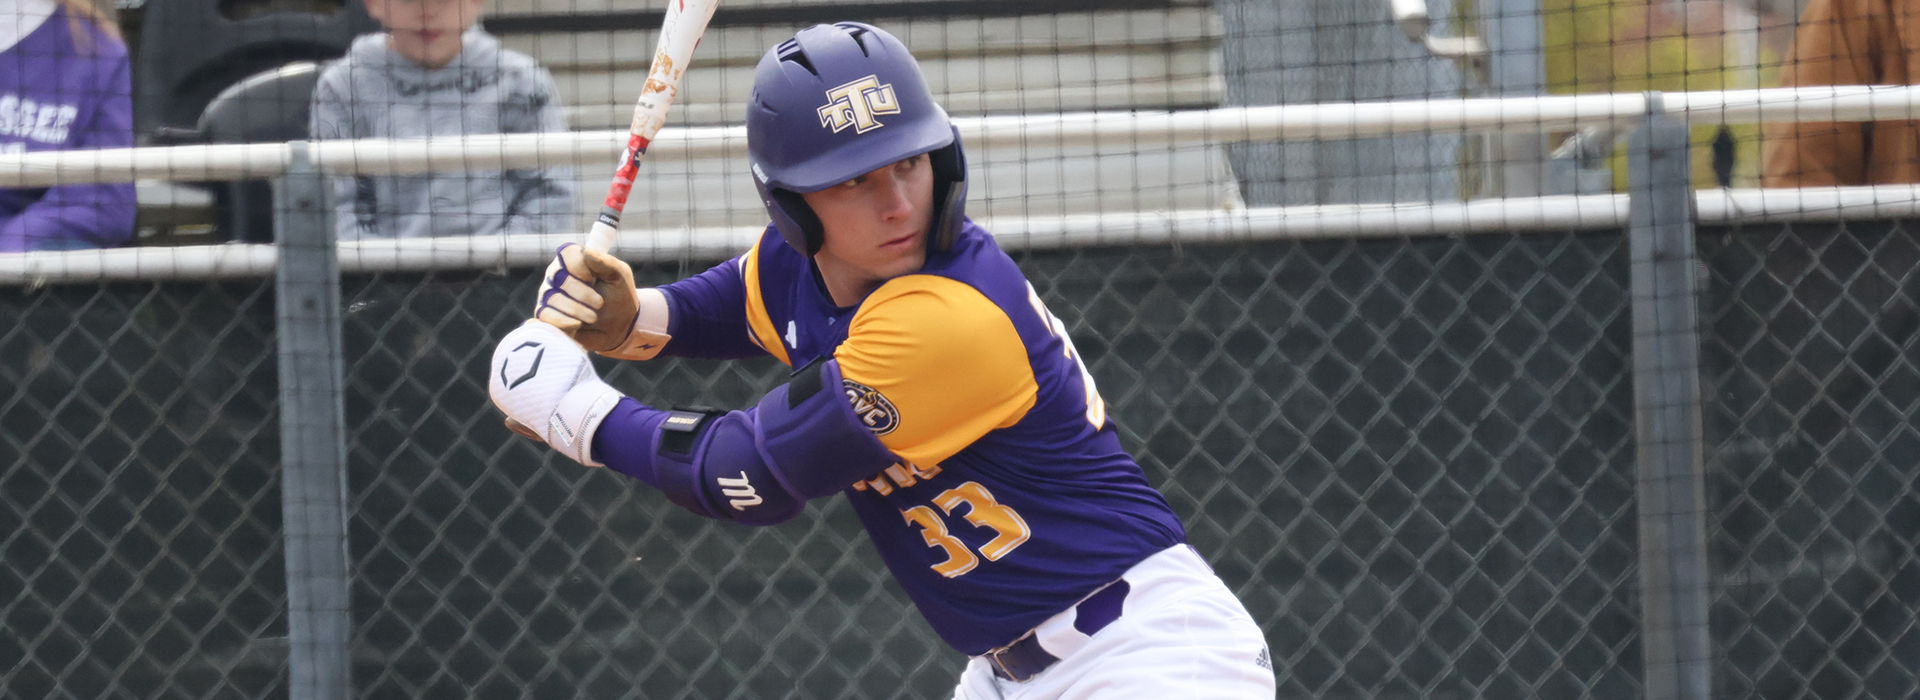 Wildcats stun Golden Eagles with walk-off slam in ninth